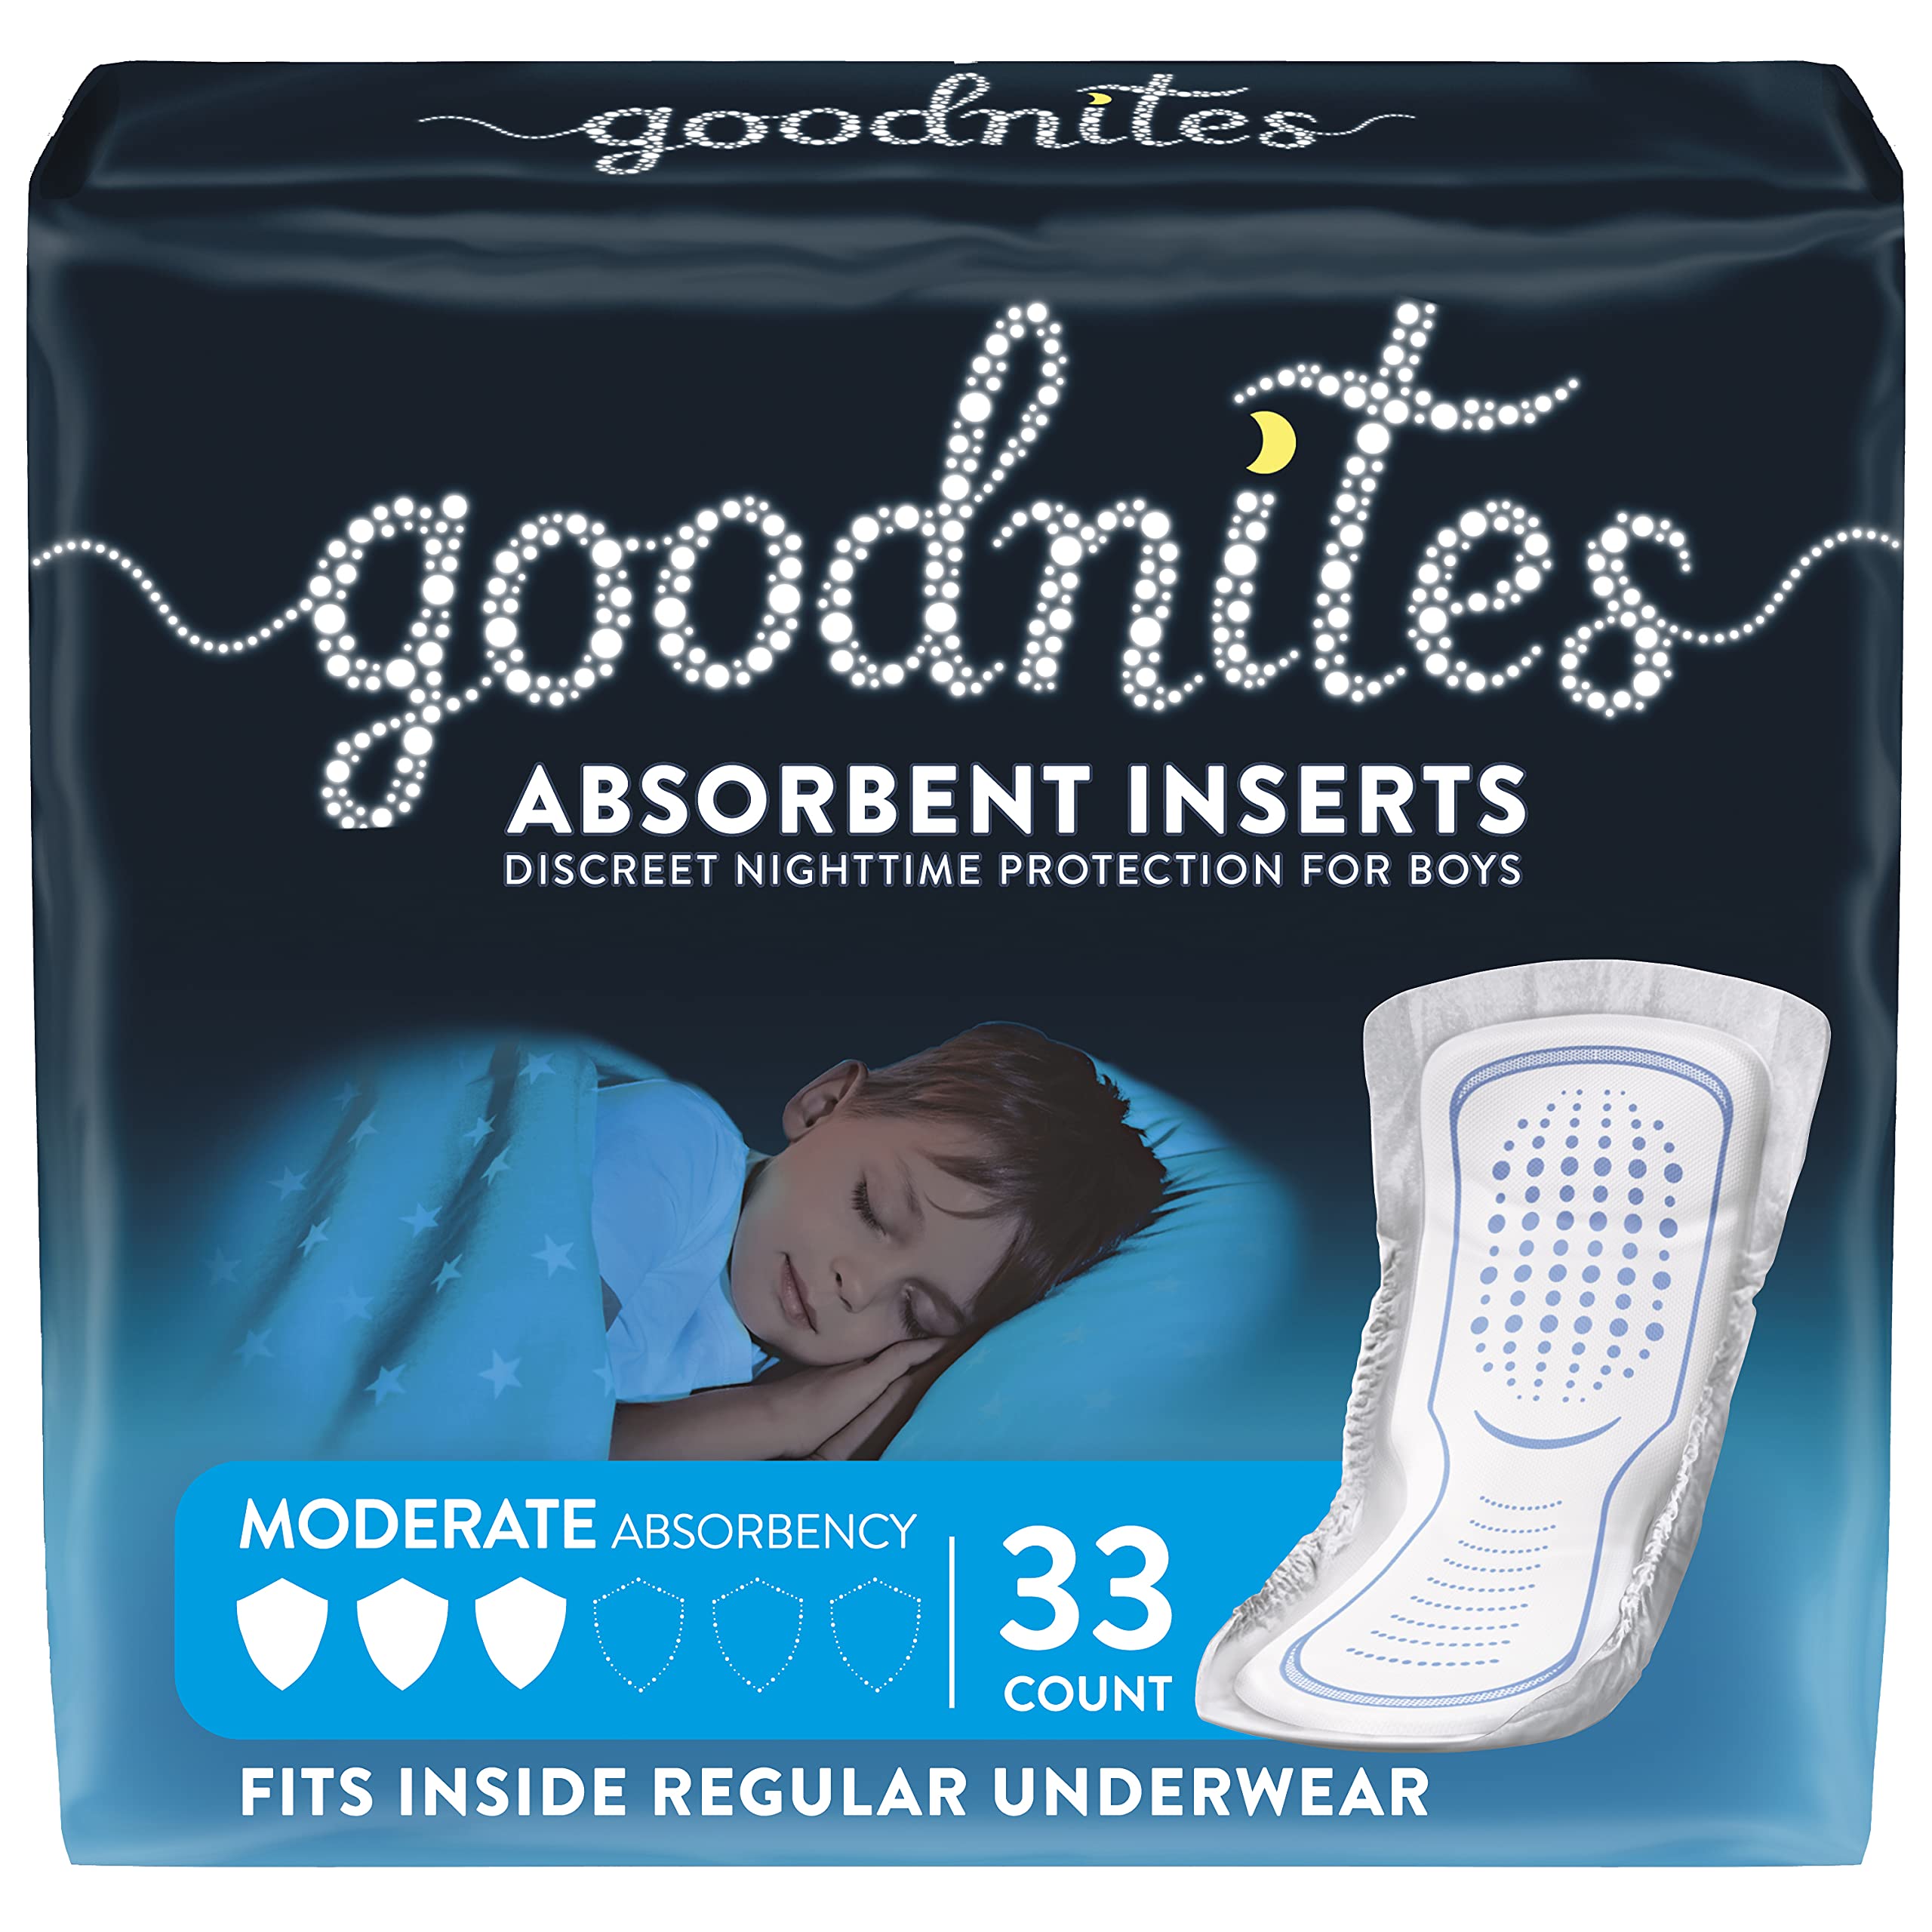 Goodnites Absorbent Bedwetting Underwear Inserts/Pads for Boys, Moderate  Absorbency, 33 Count, FSA/HSA-Eligible